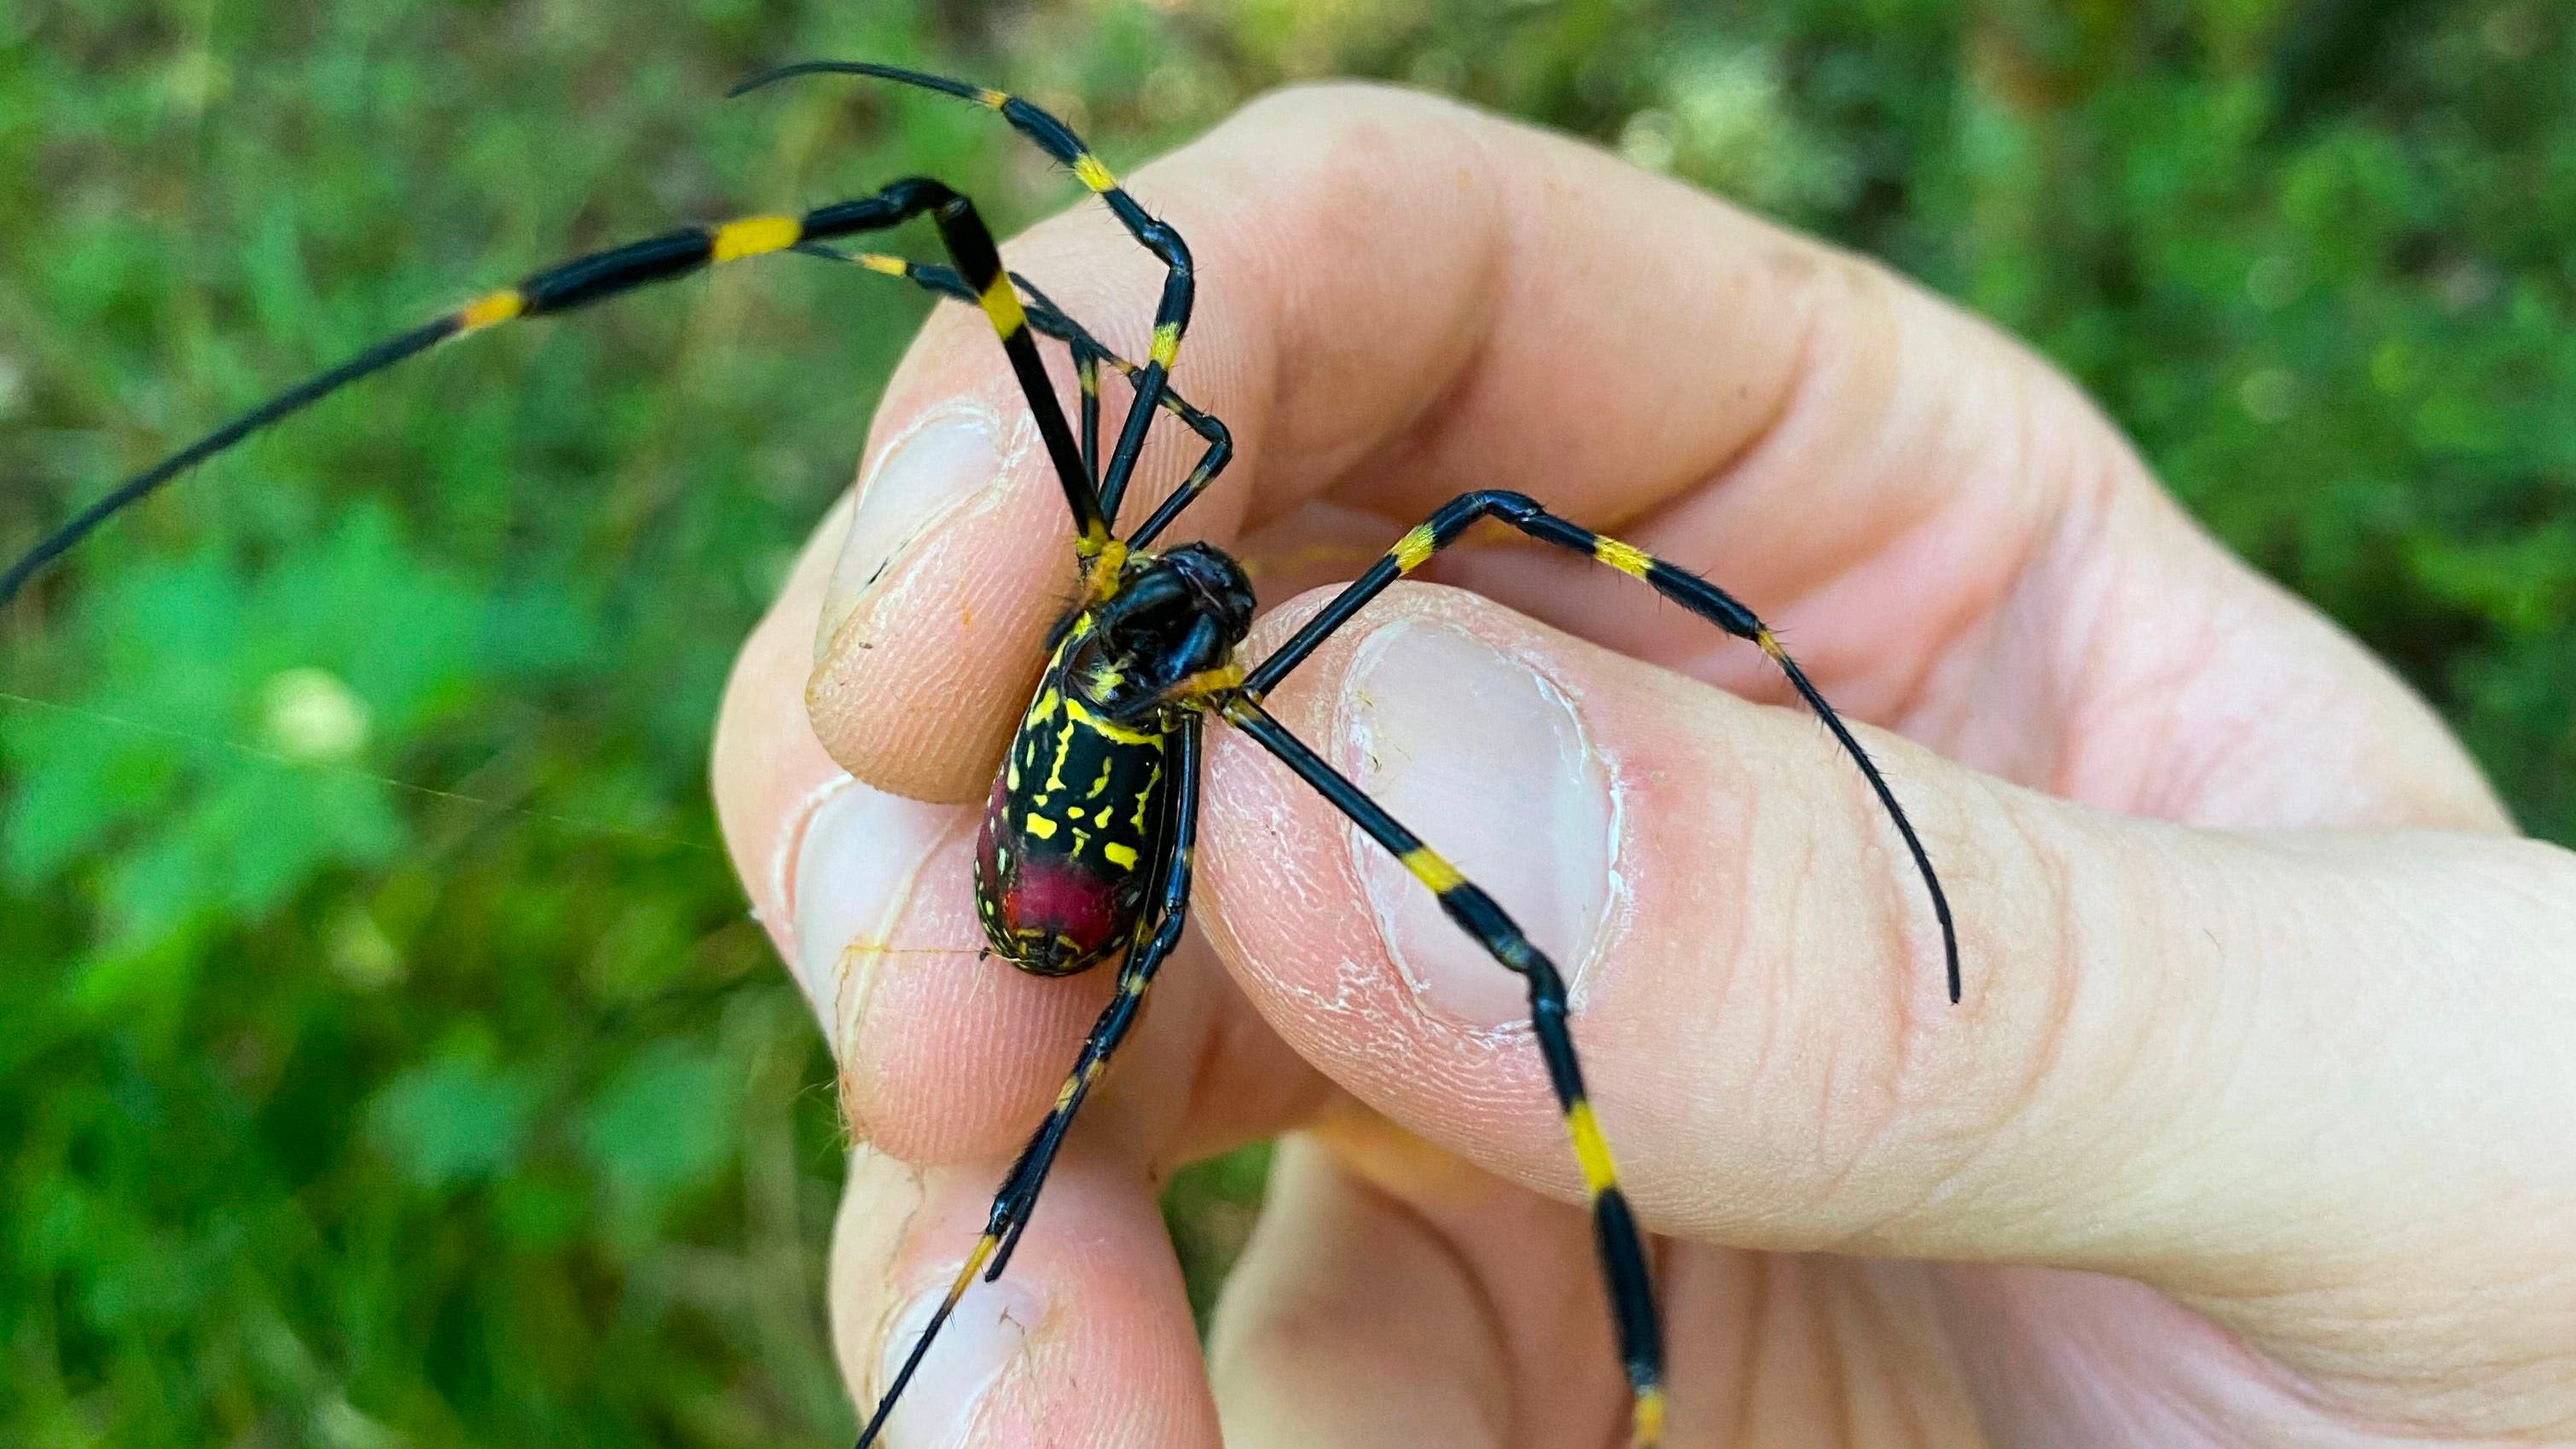 Joro spiders haven’t been spotted in Florida yet. Here’s the venomous bugs to worry about